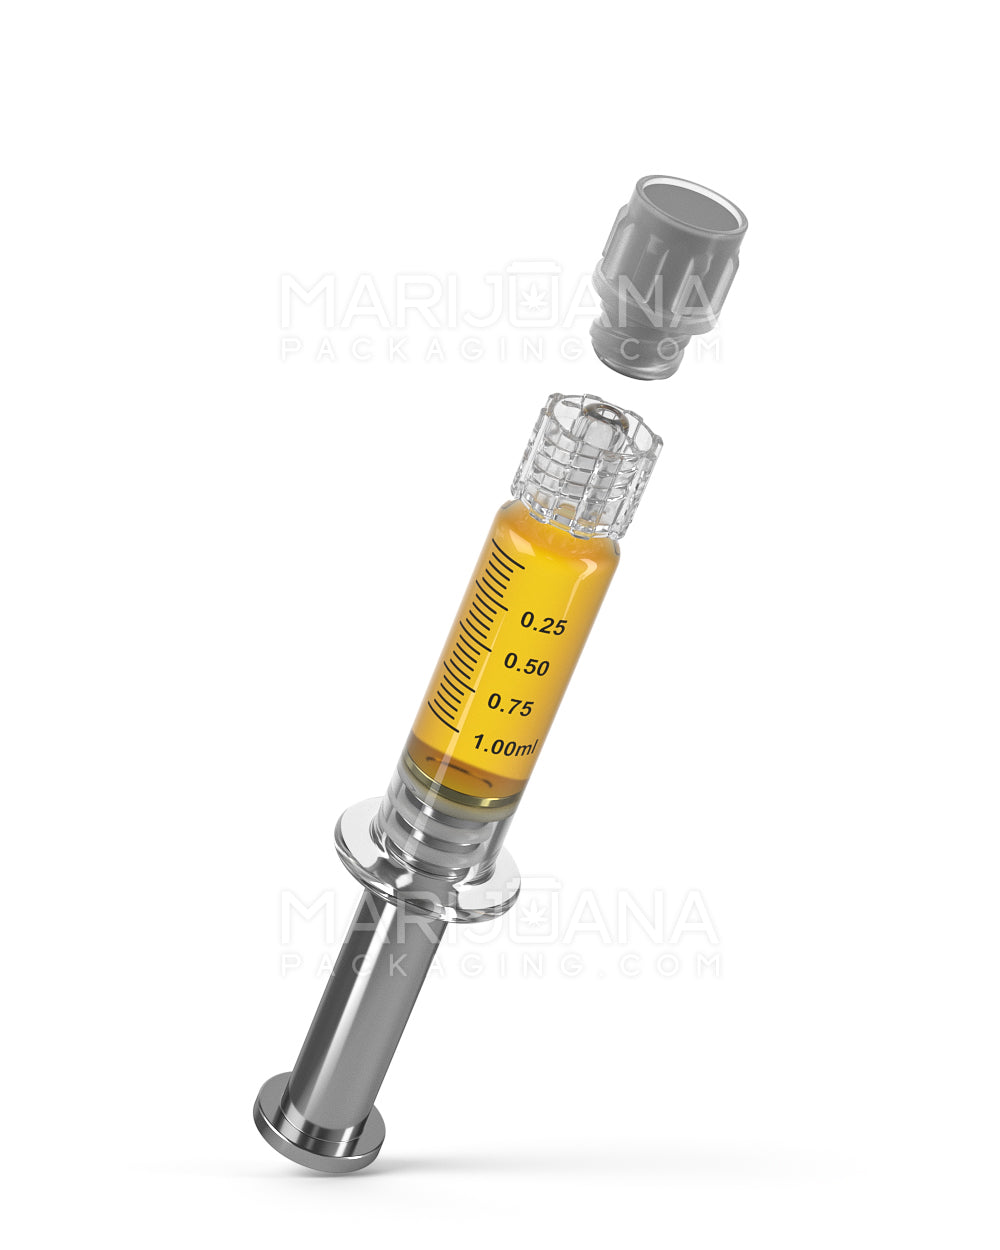 Luer Lock | Glass Dab Applicator Syringes w/ Metal Plunger | 1mL - 0.25mL Increments | Sample - 6